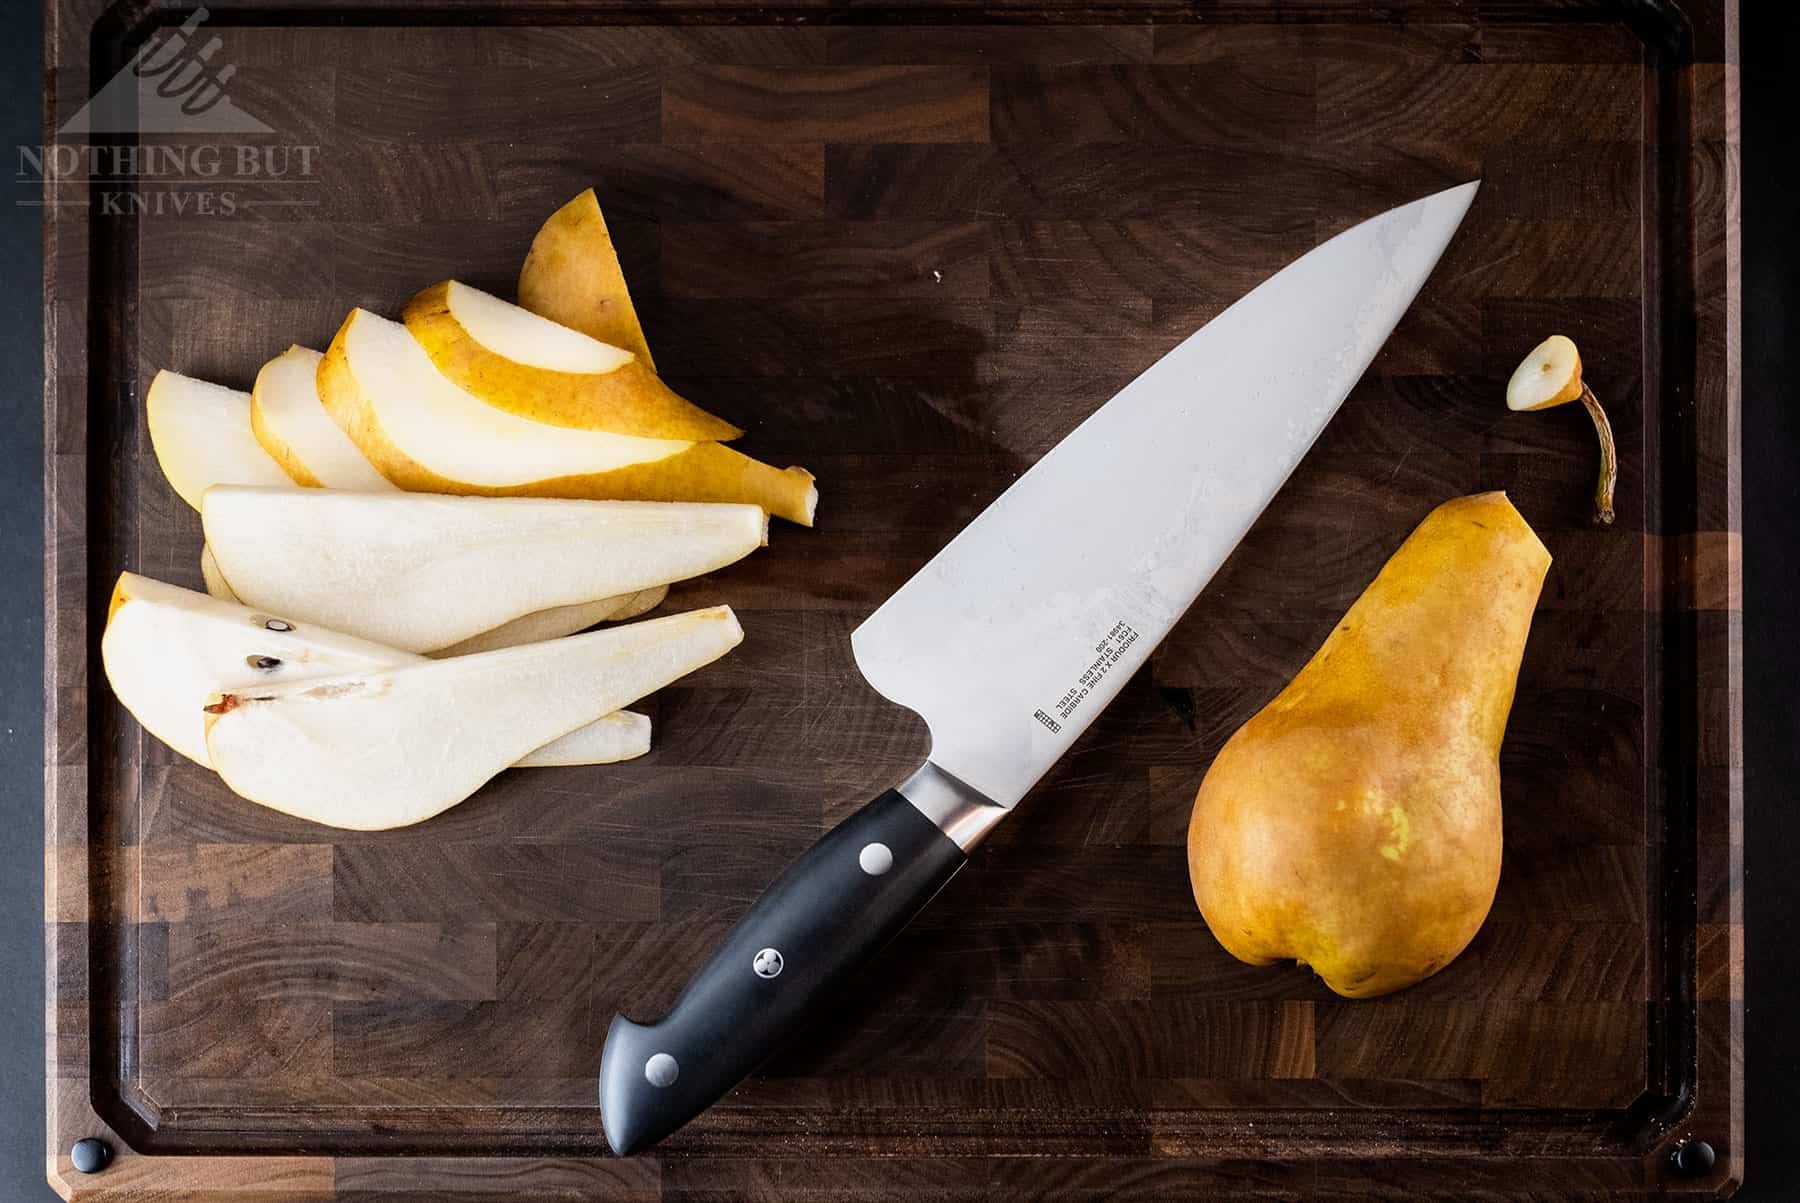 The Zwilling by Kramer Euroline 8 inch chef knife is the standout knife in this set. It is pictured hear on a cutting boars with a pear it sliced into pieces.